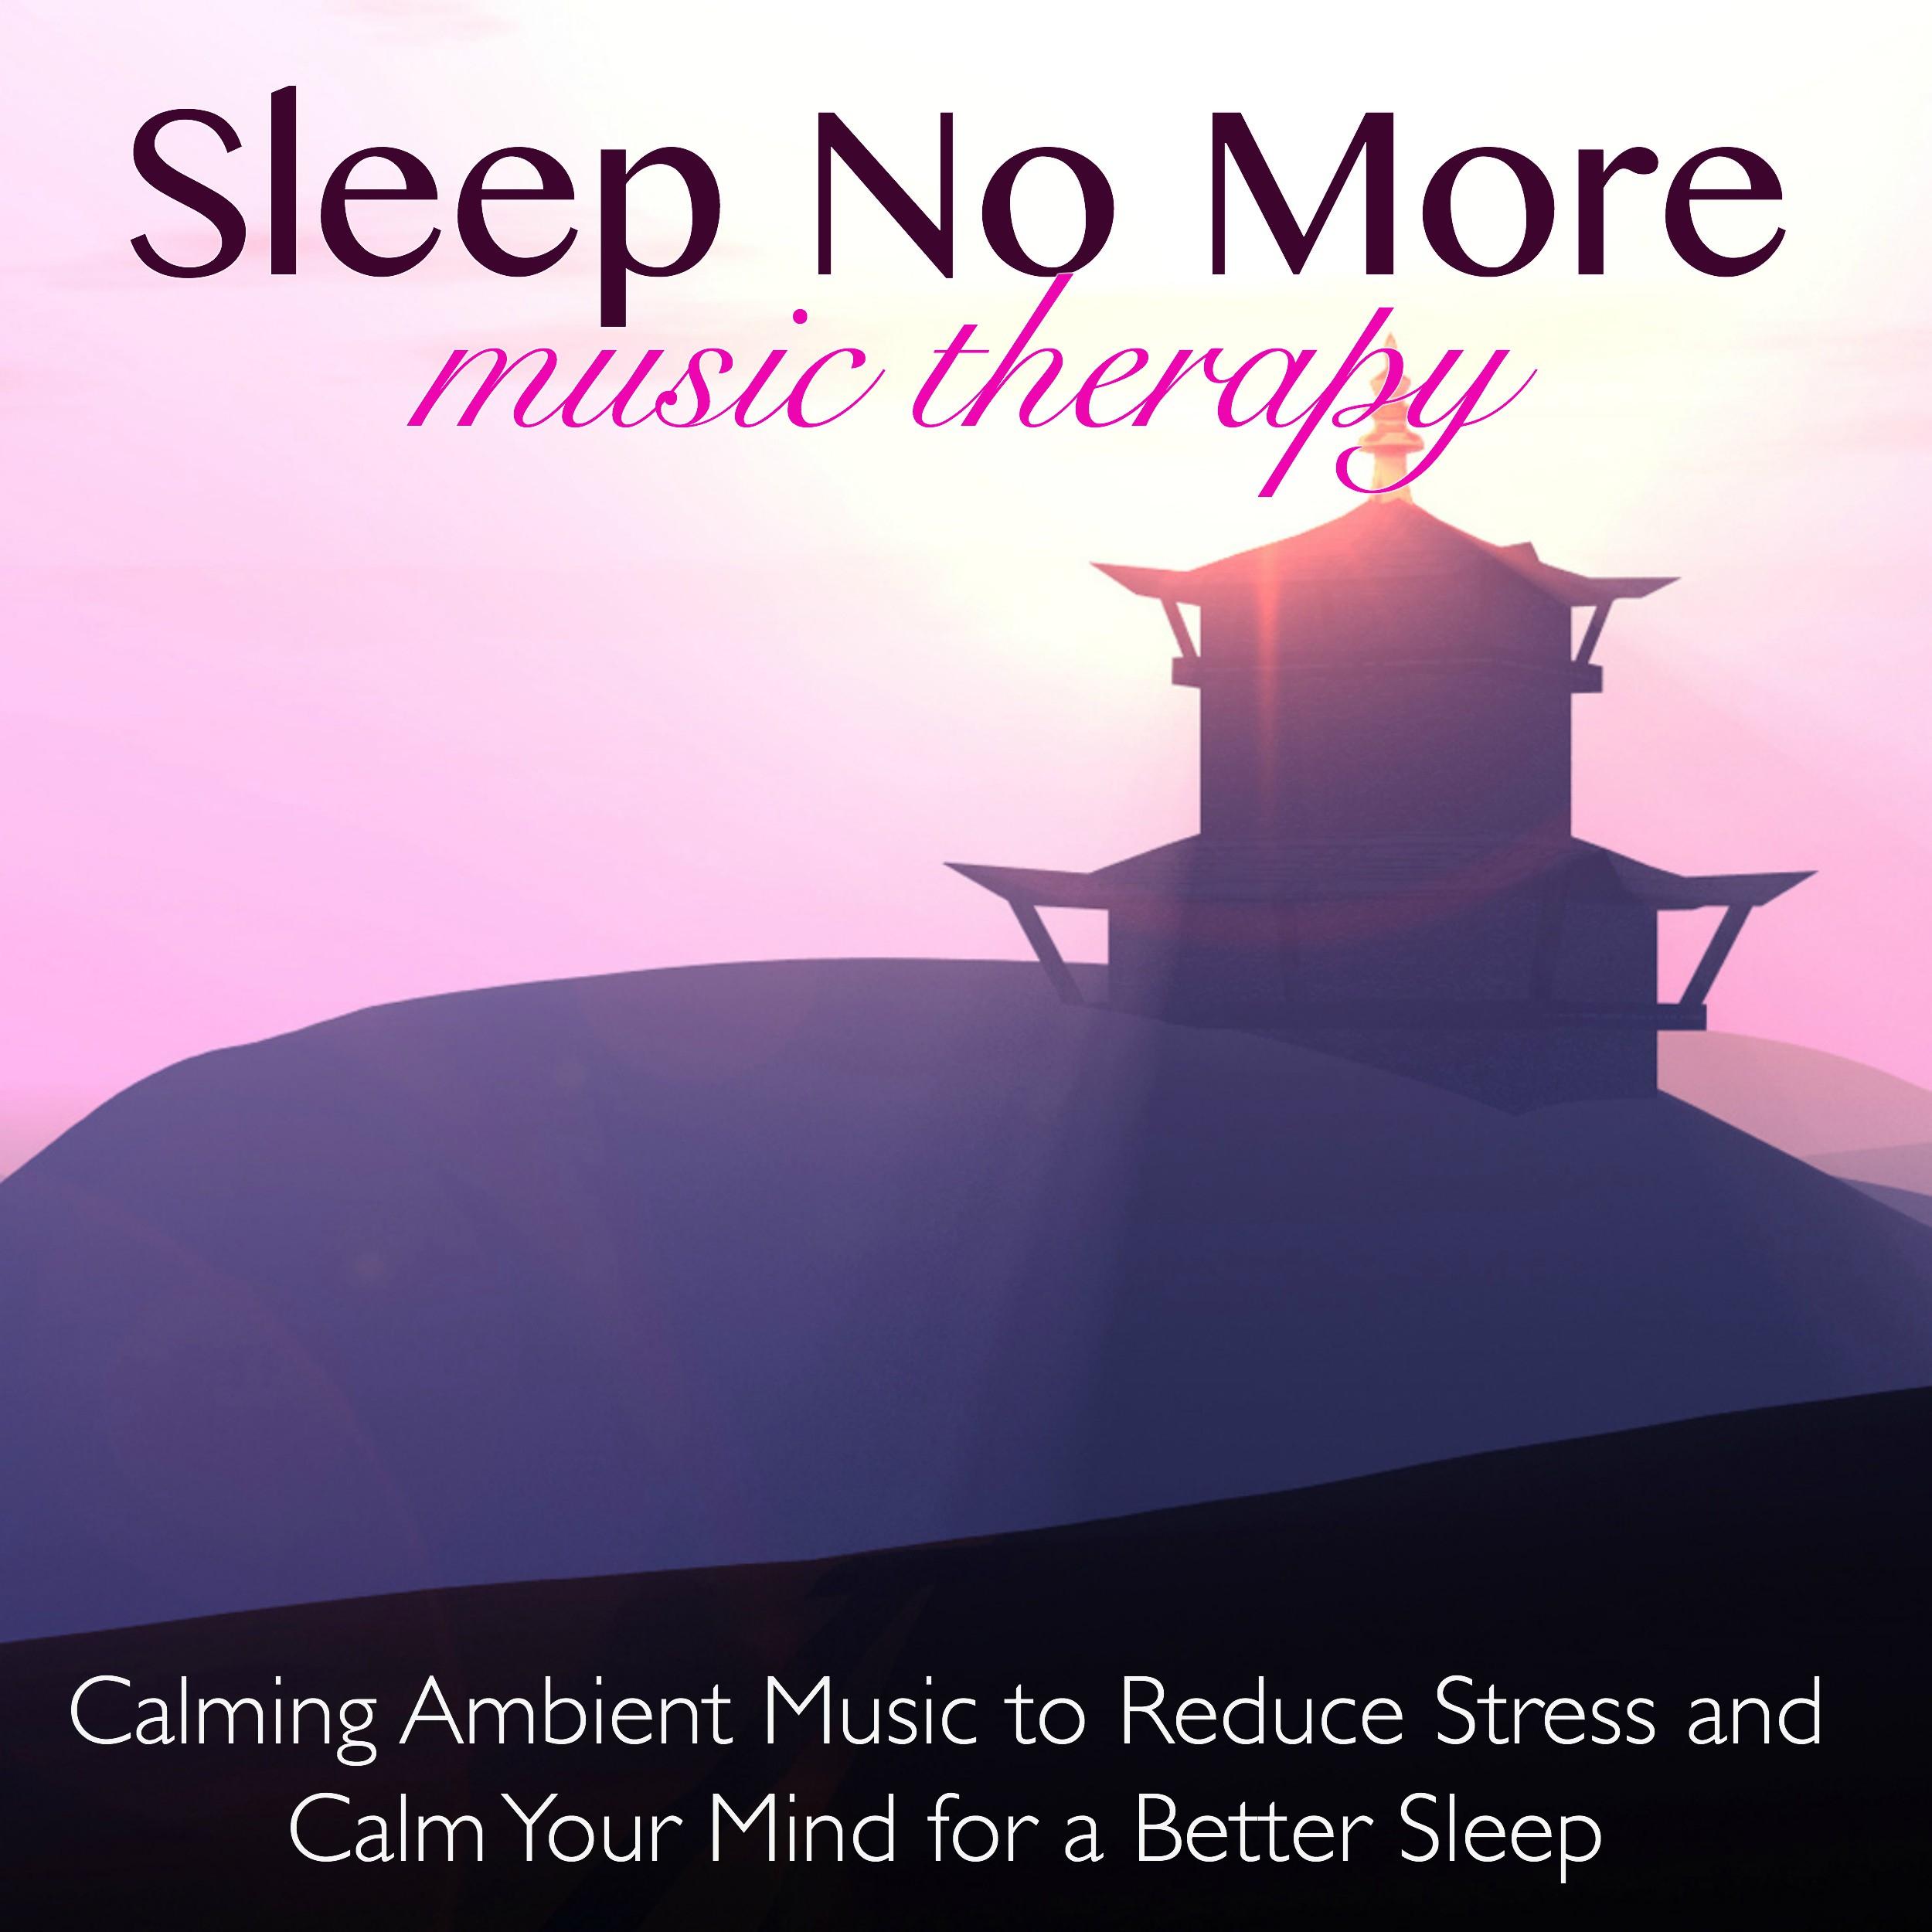 Sleep No More Music Therapy – Calming Ambient Music to Reduce Stress and Calm Your Mind for a Better Sleep